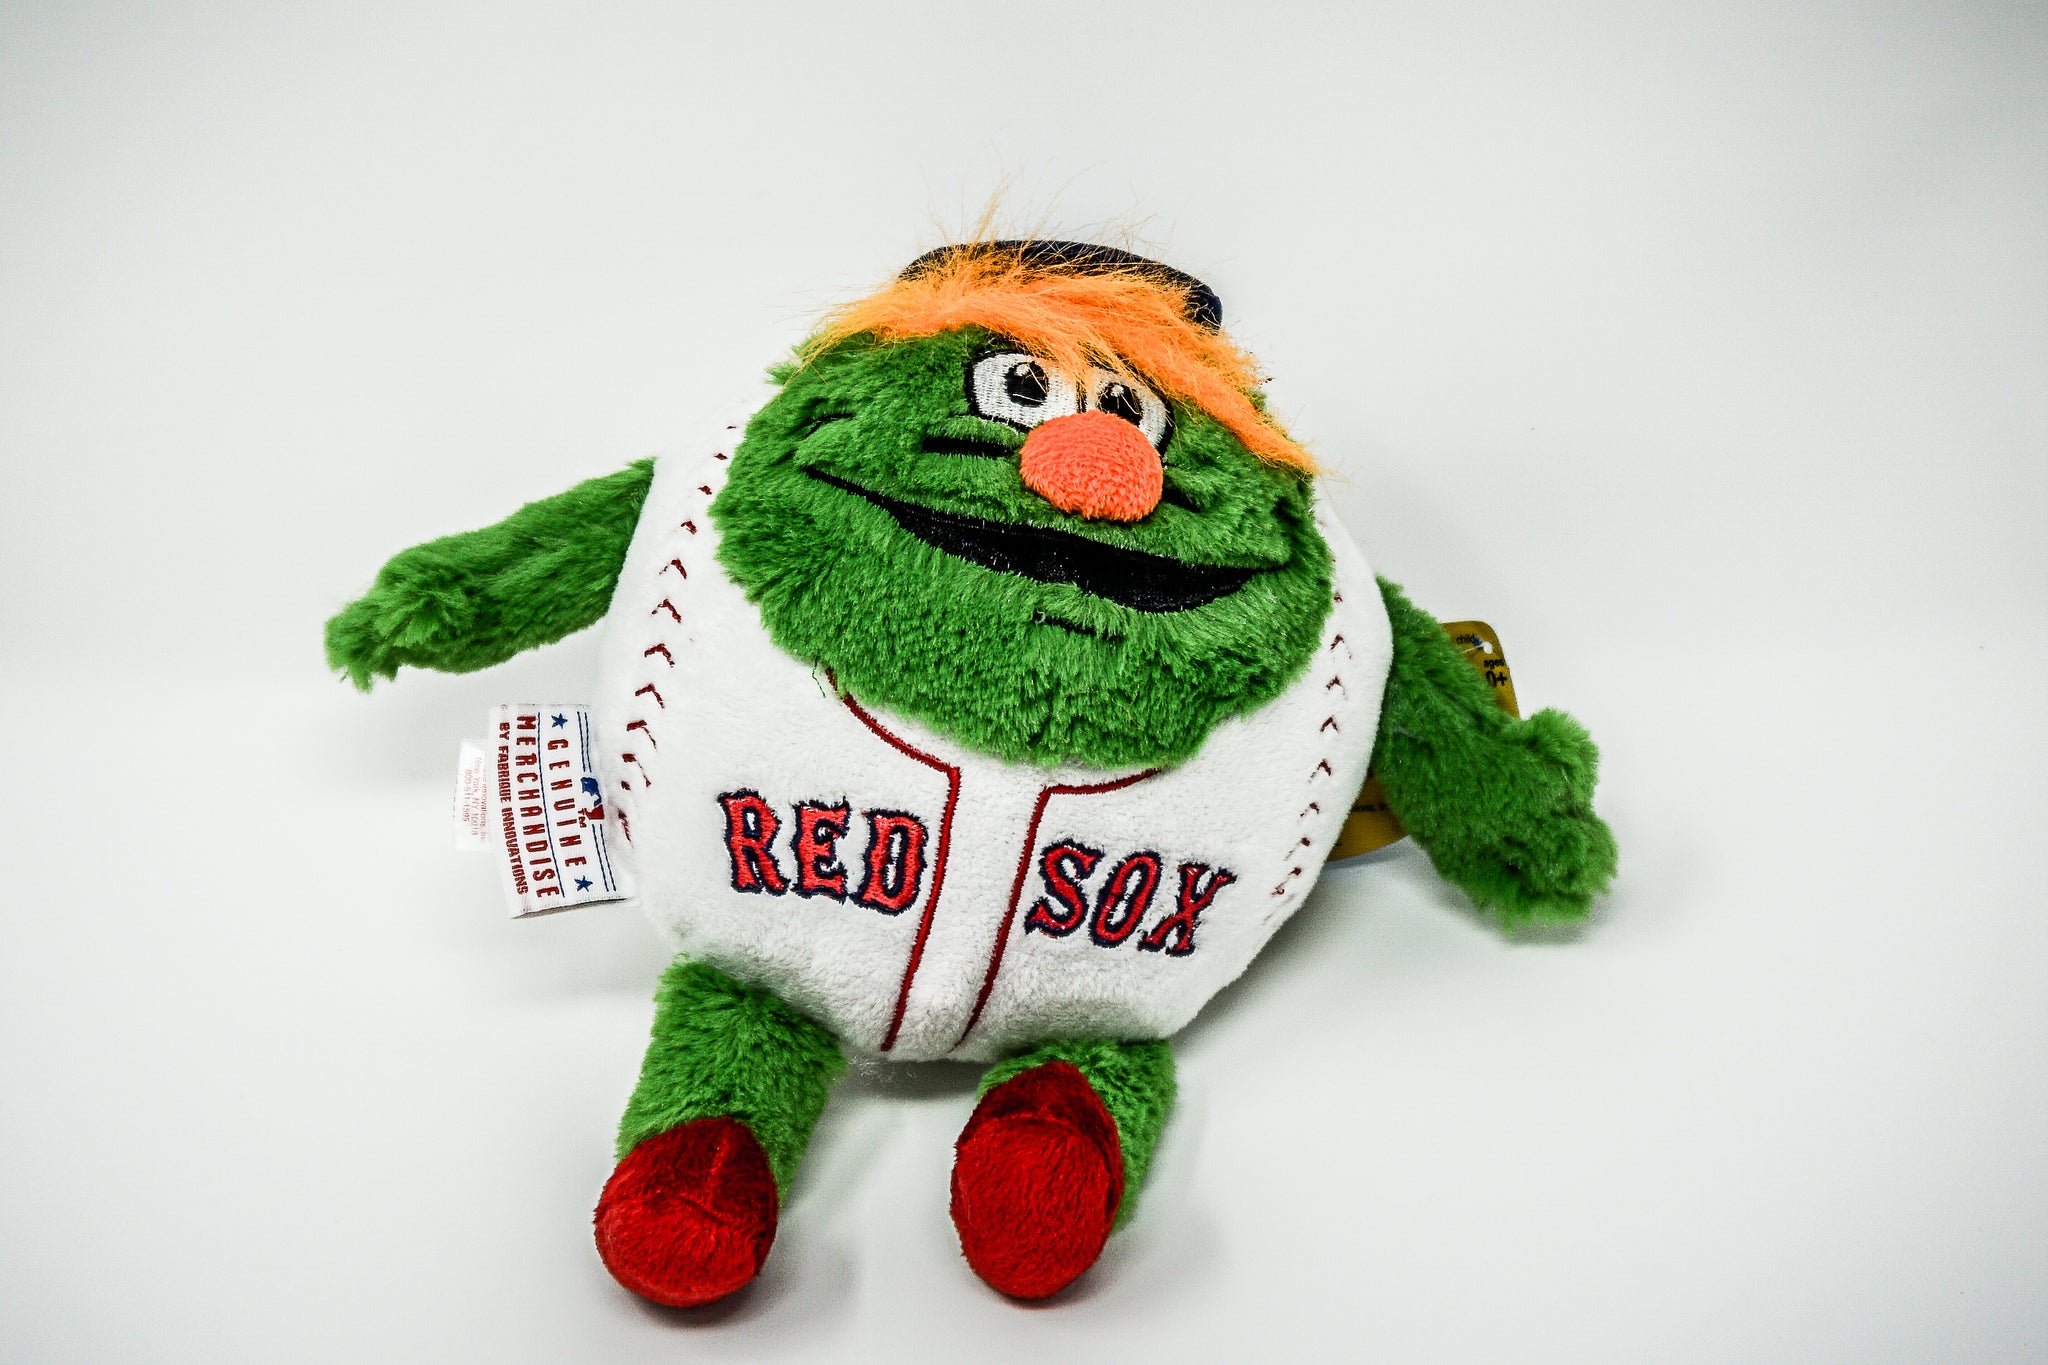 PHOTO GALLERY/Wally the Green Monster comes to Cohasset!